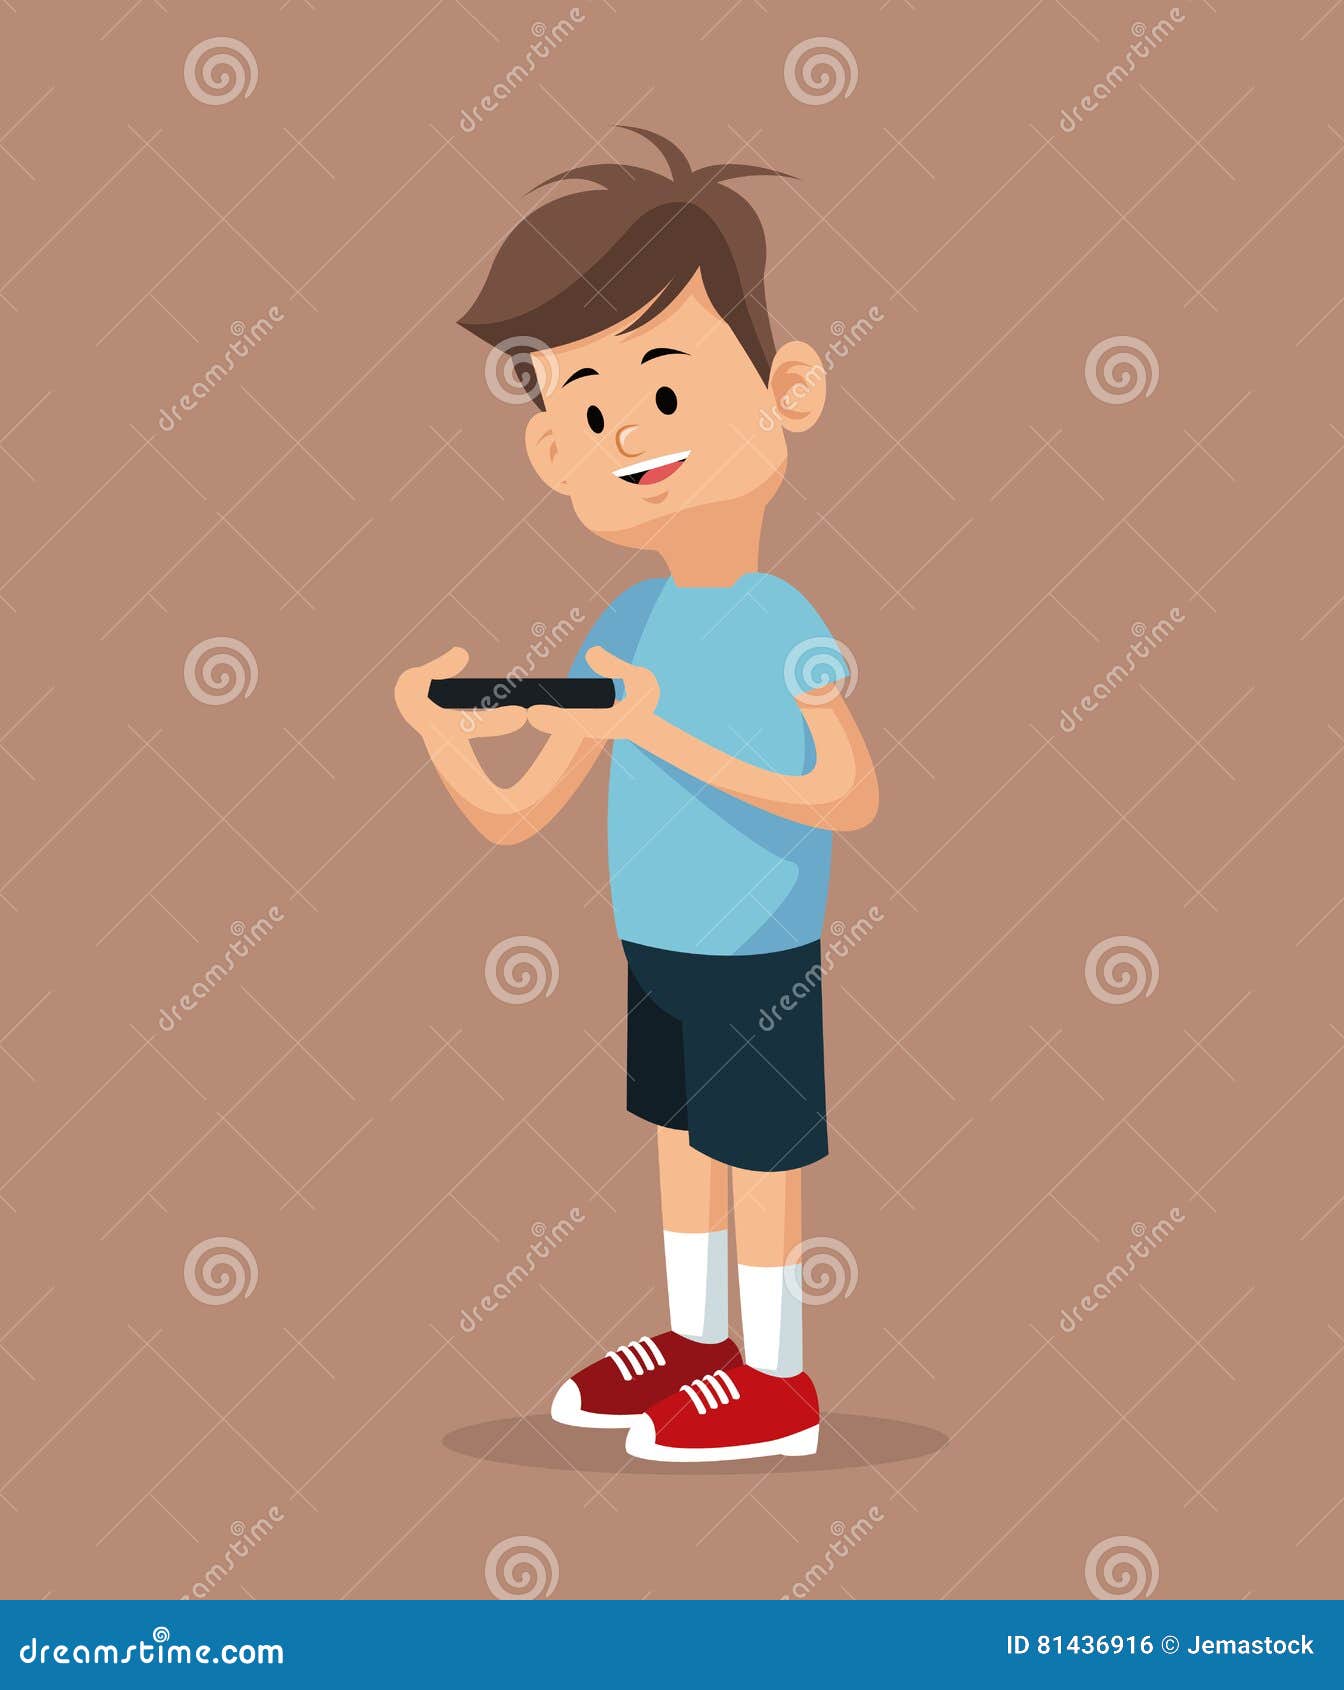 Young Gamer Standing with Smartphone Stock Vector - Illustration of ...